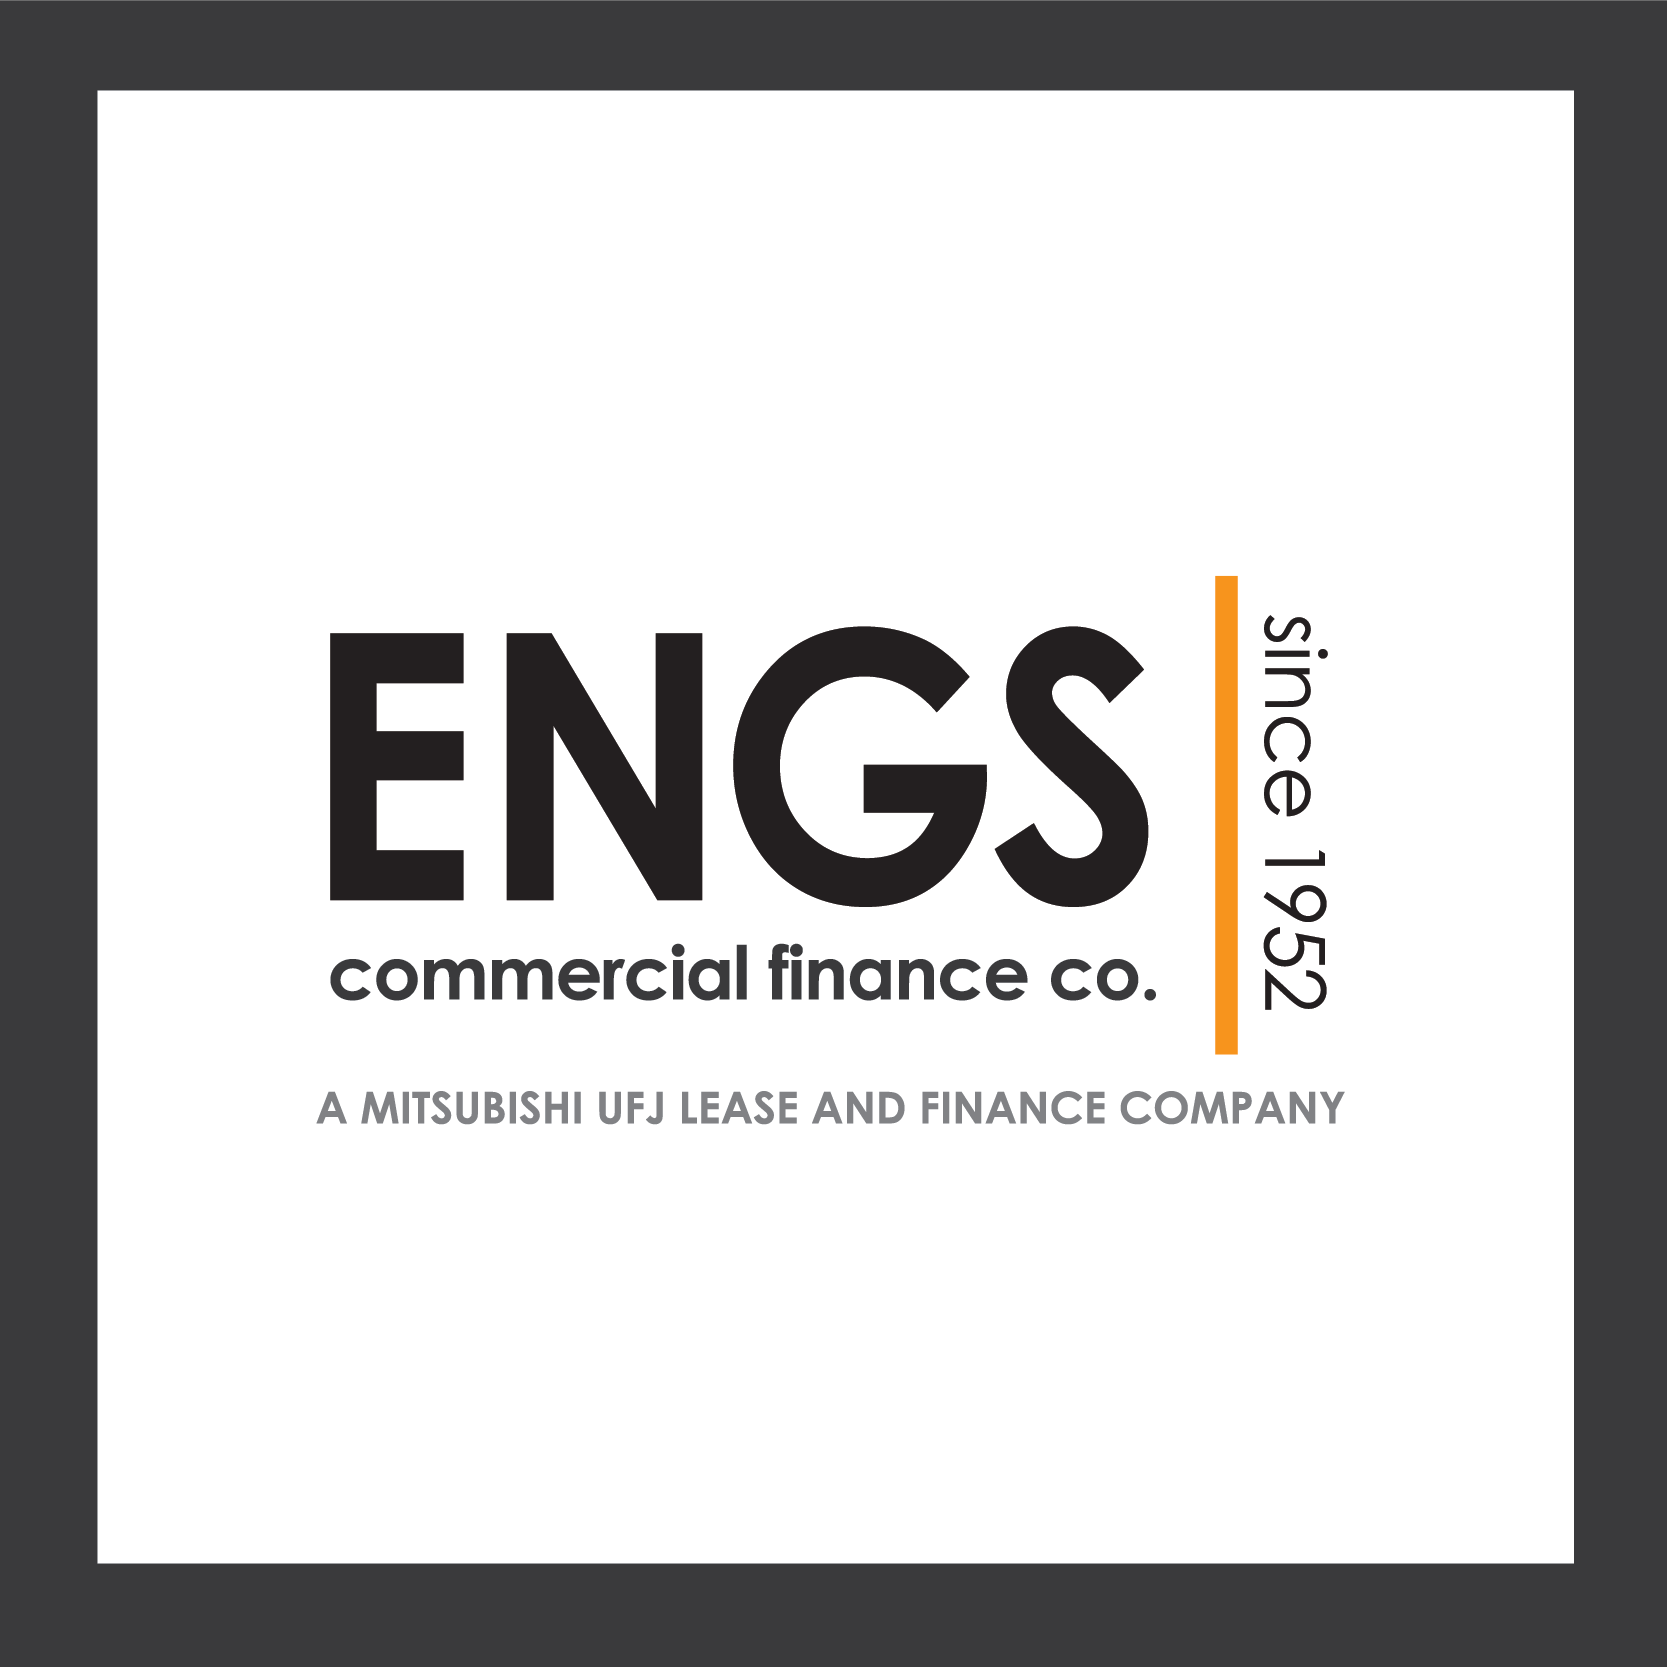 ENGS Commercial Finance